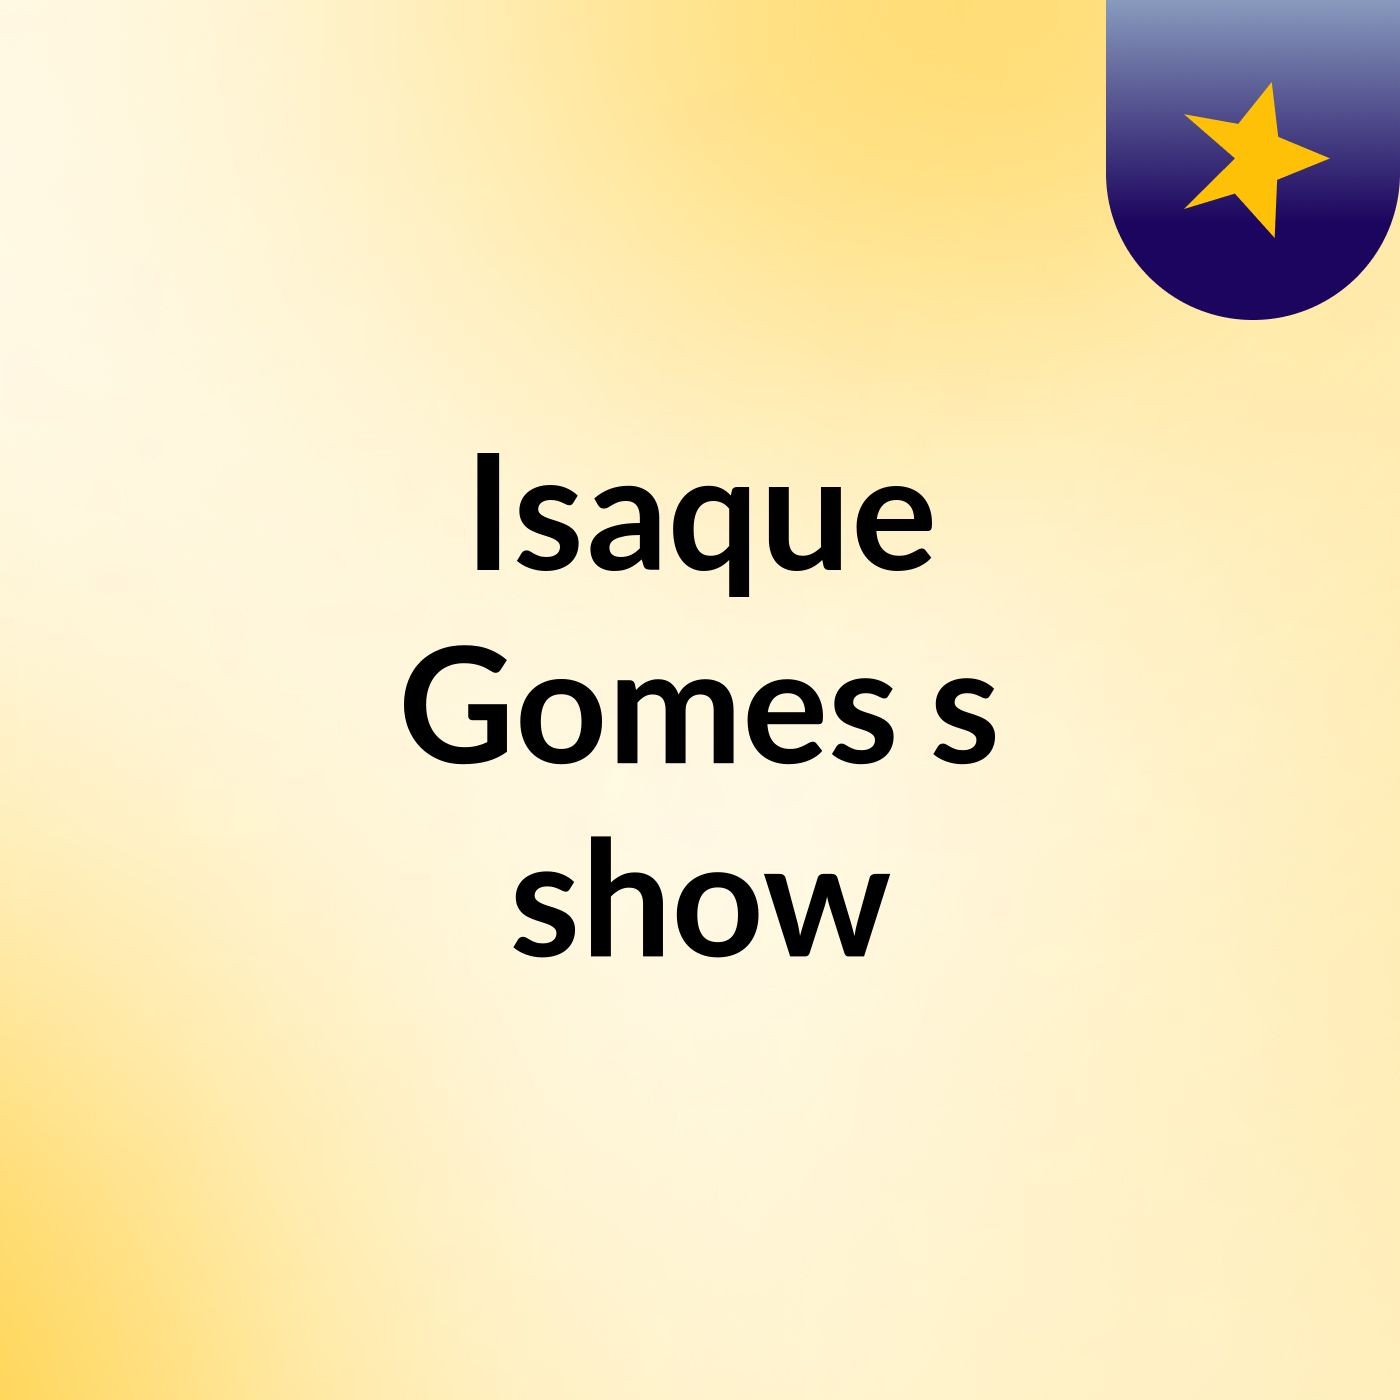 Isaque Gomes's show